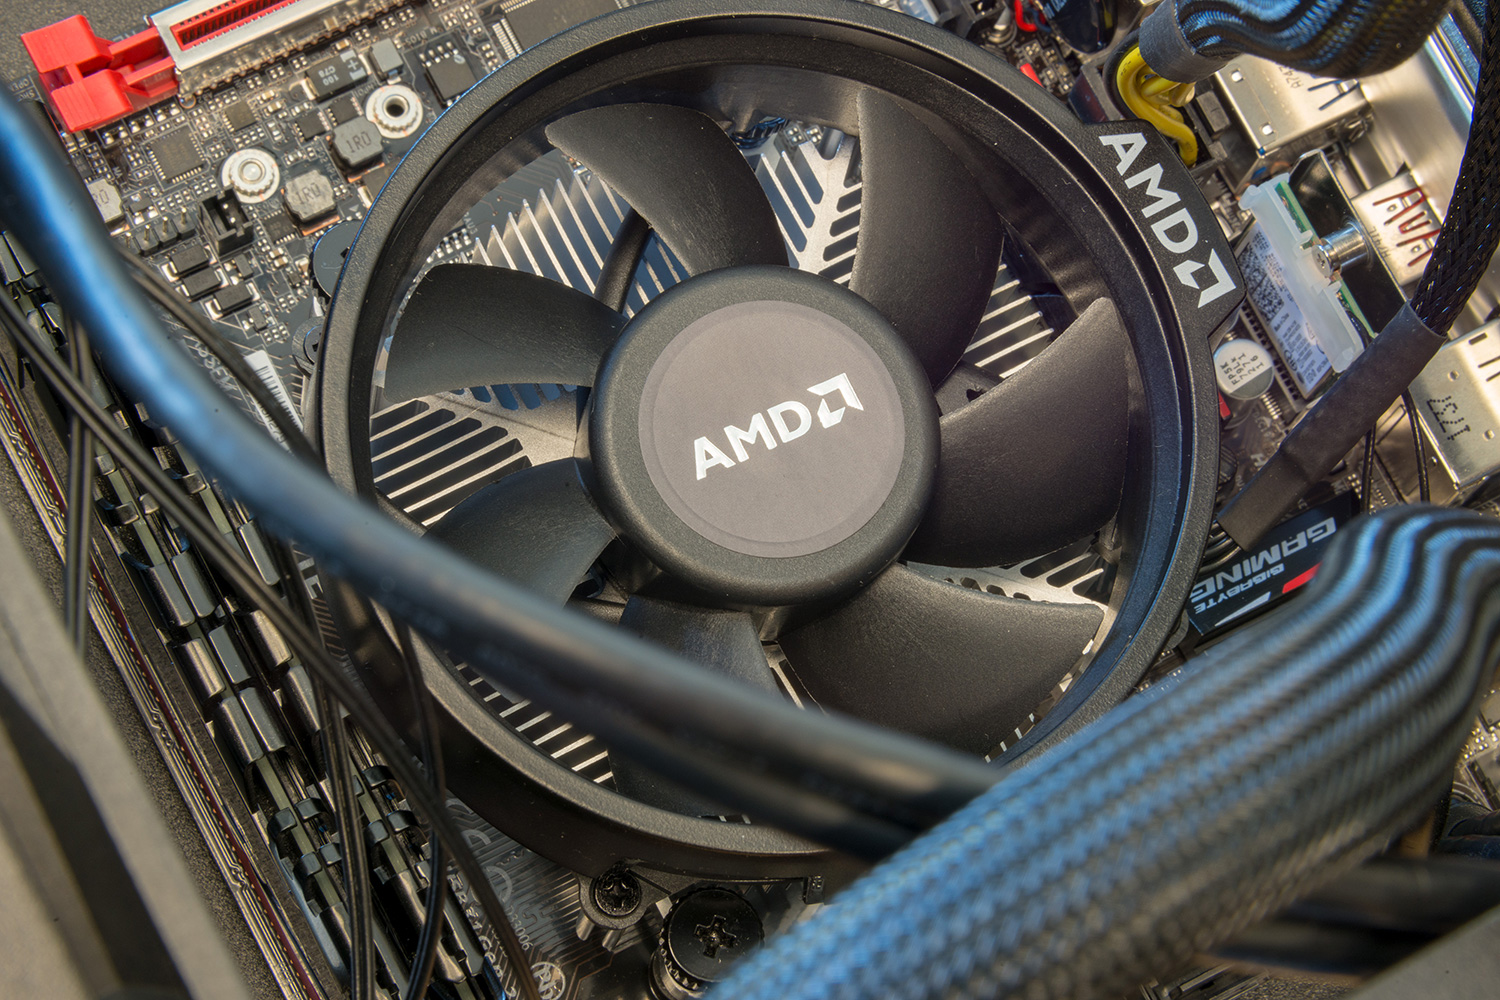 Microsoft confirms 'AMD's upcoming RDNA 2' GPUs will support new DX12